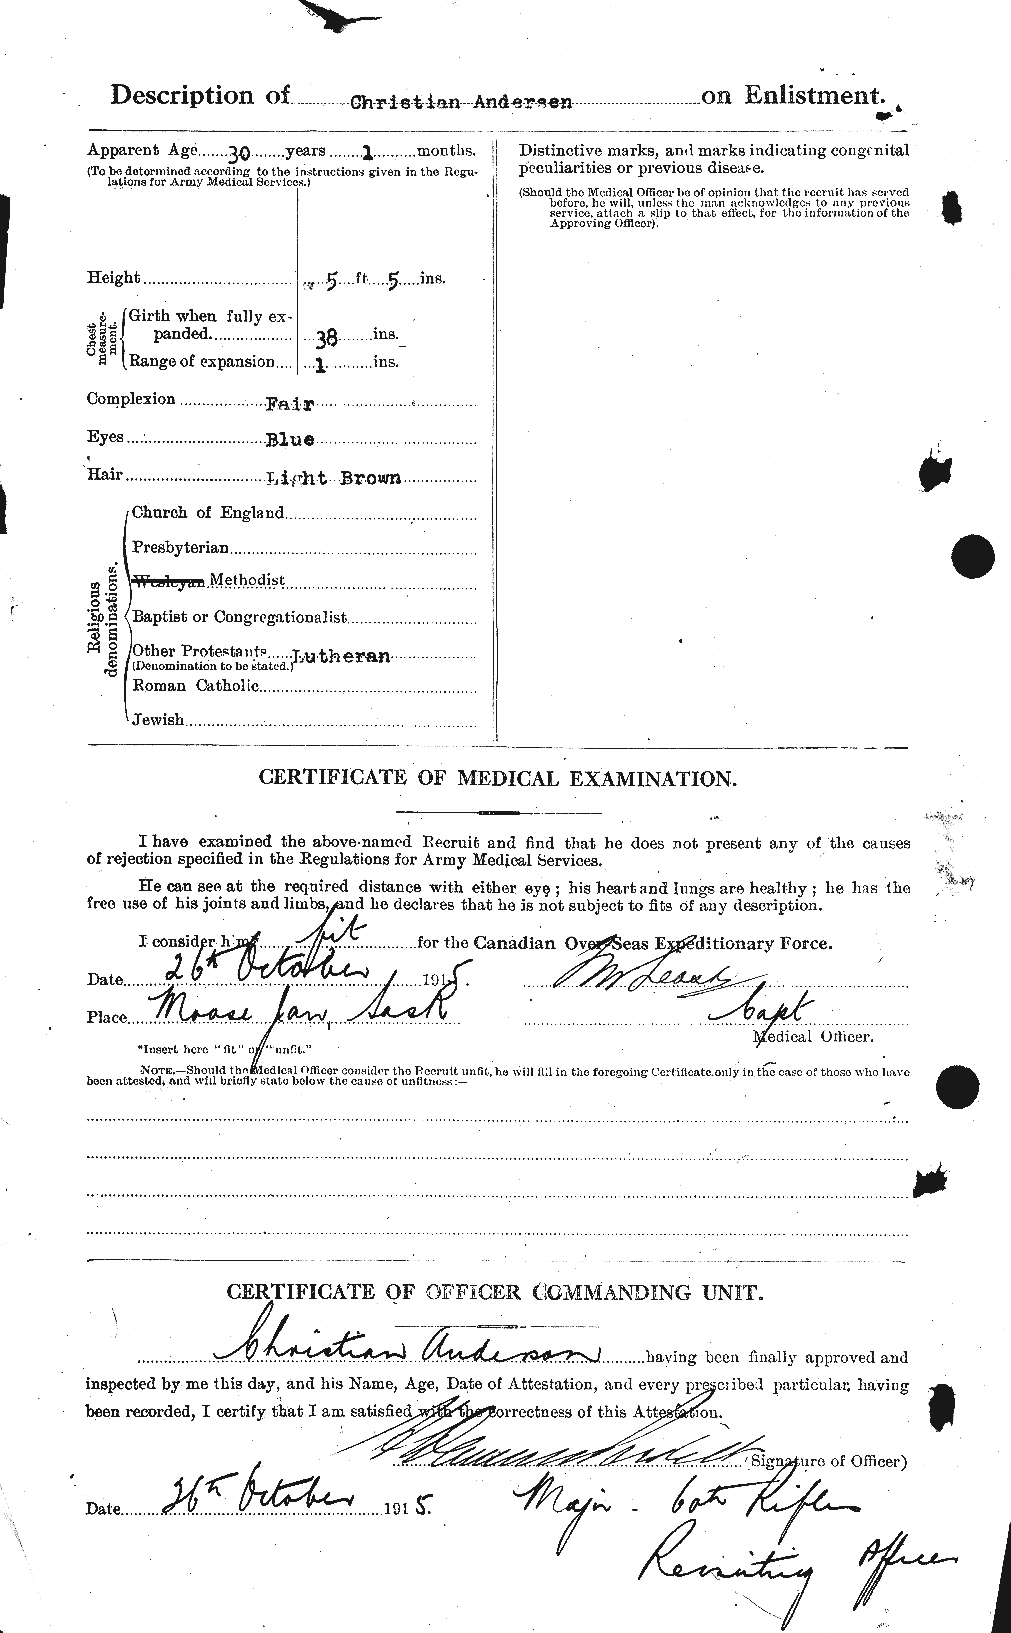 Personnel Records of the First World War - CEF 209591b